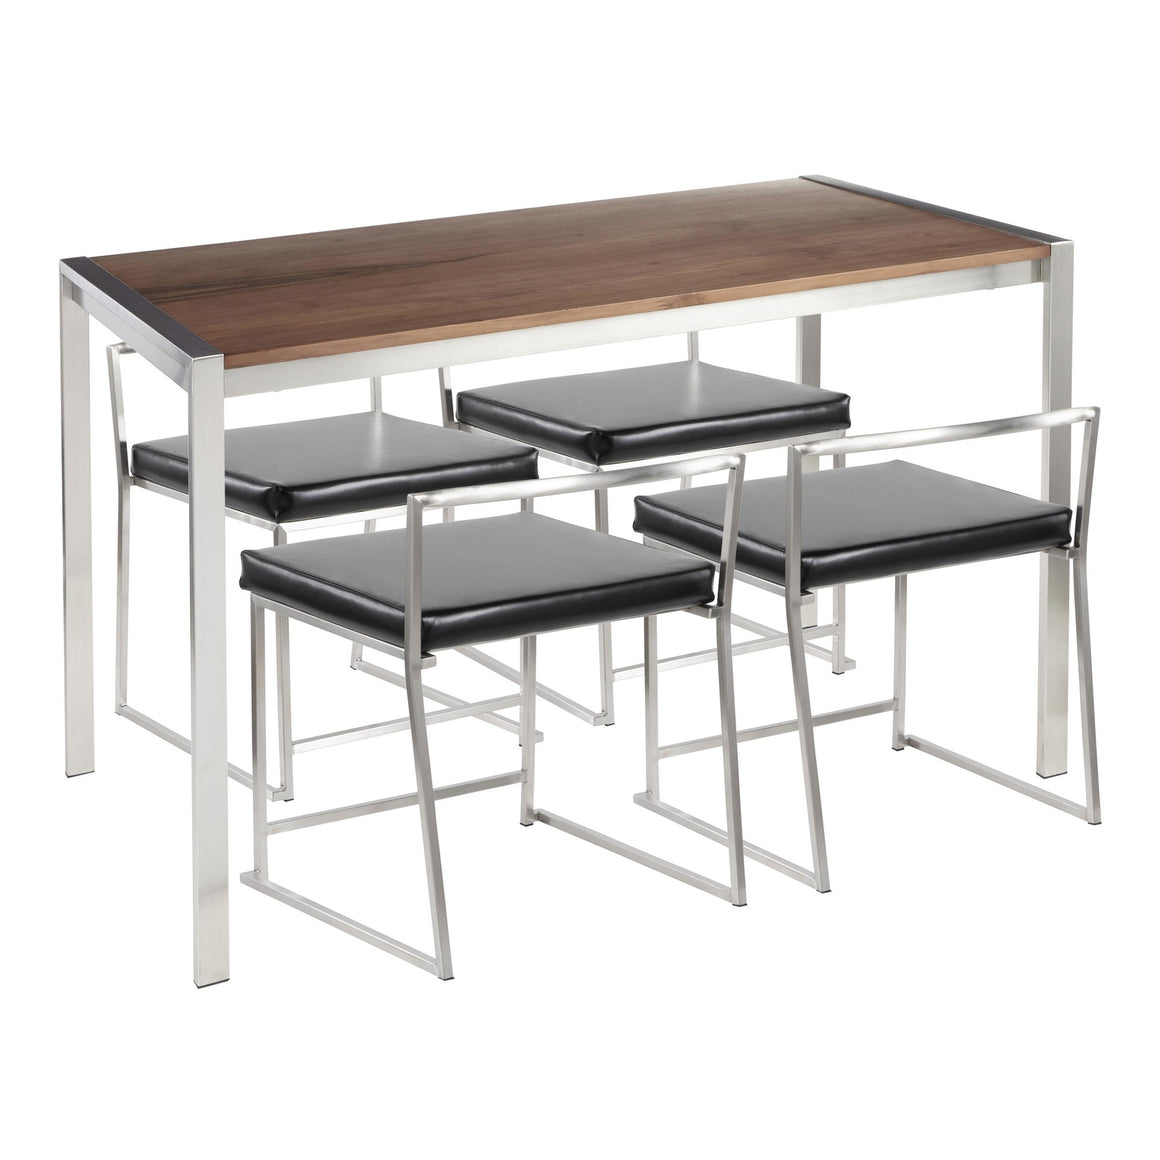 Fuji 5-Piece Contemporary Dining Set in Stainless Steel, Walnut Wood and Black Faux Leather by LumiSource